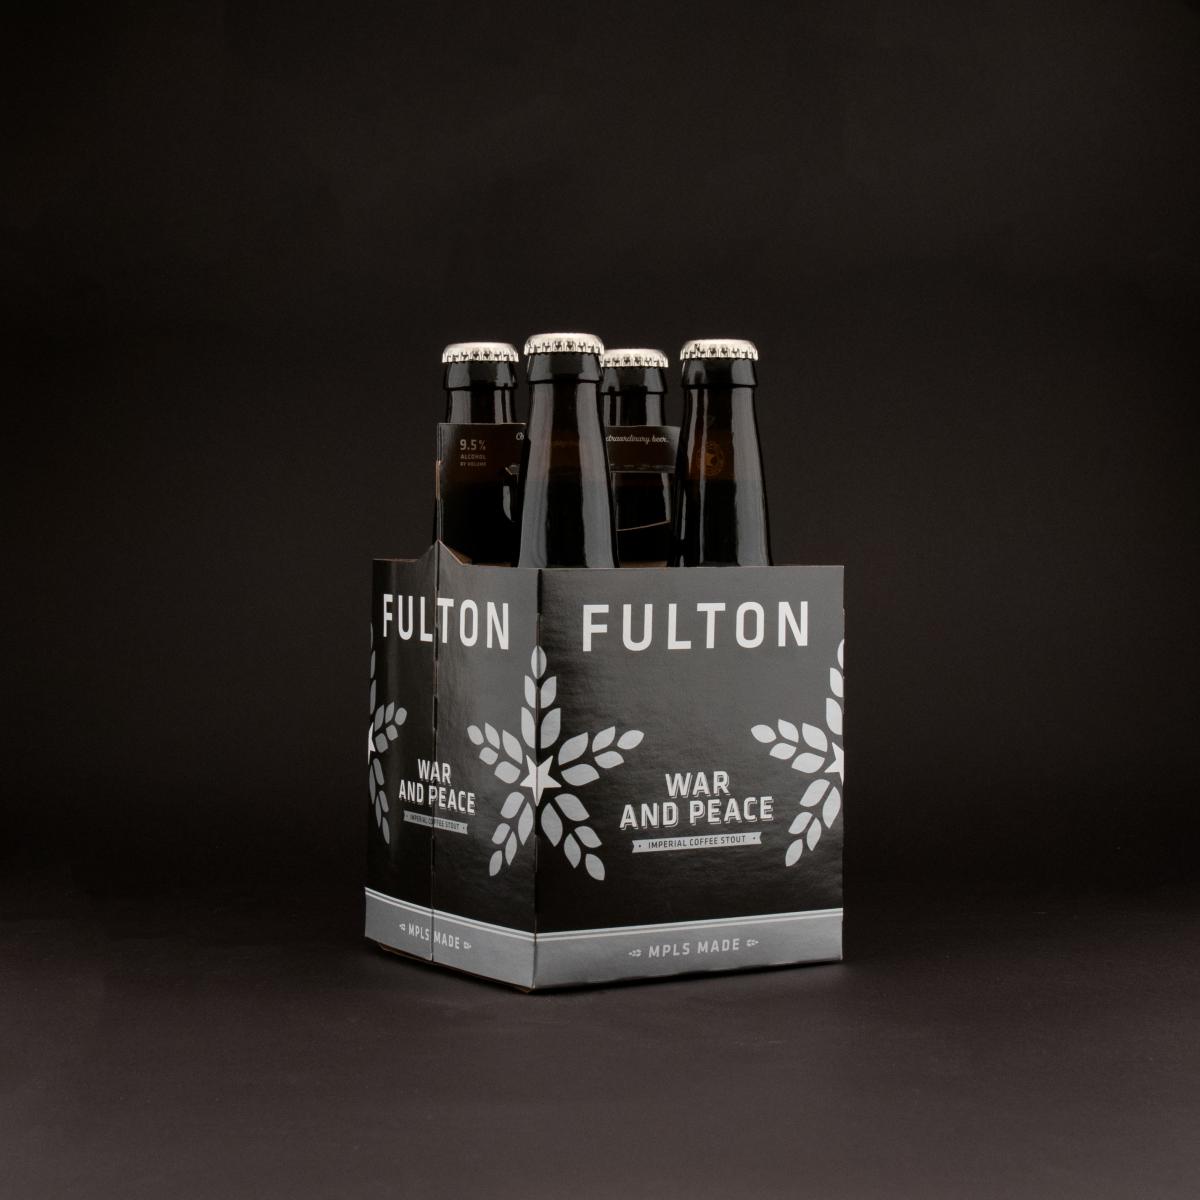 Fulton's Imperial Coffee Stout: War & Peace